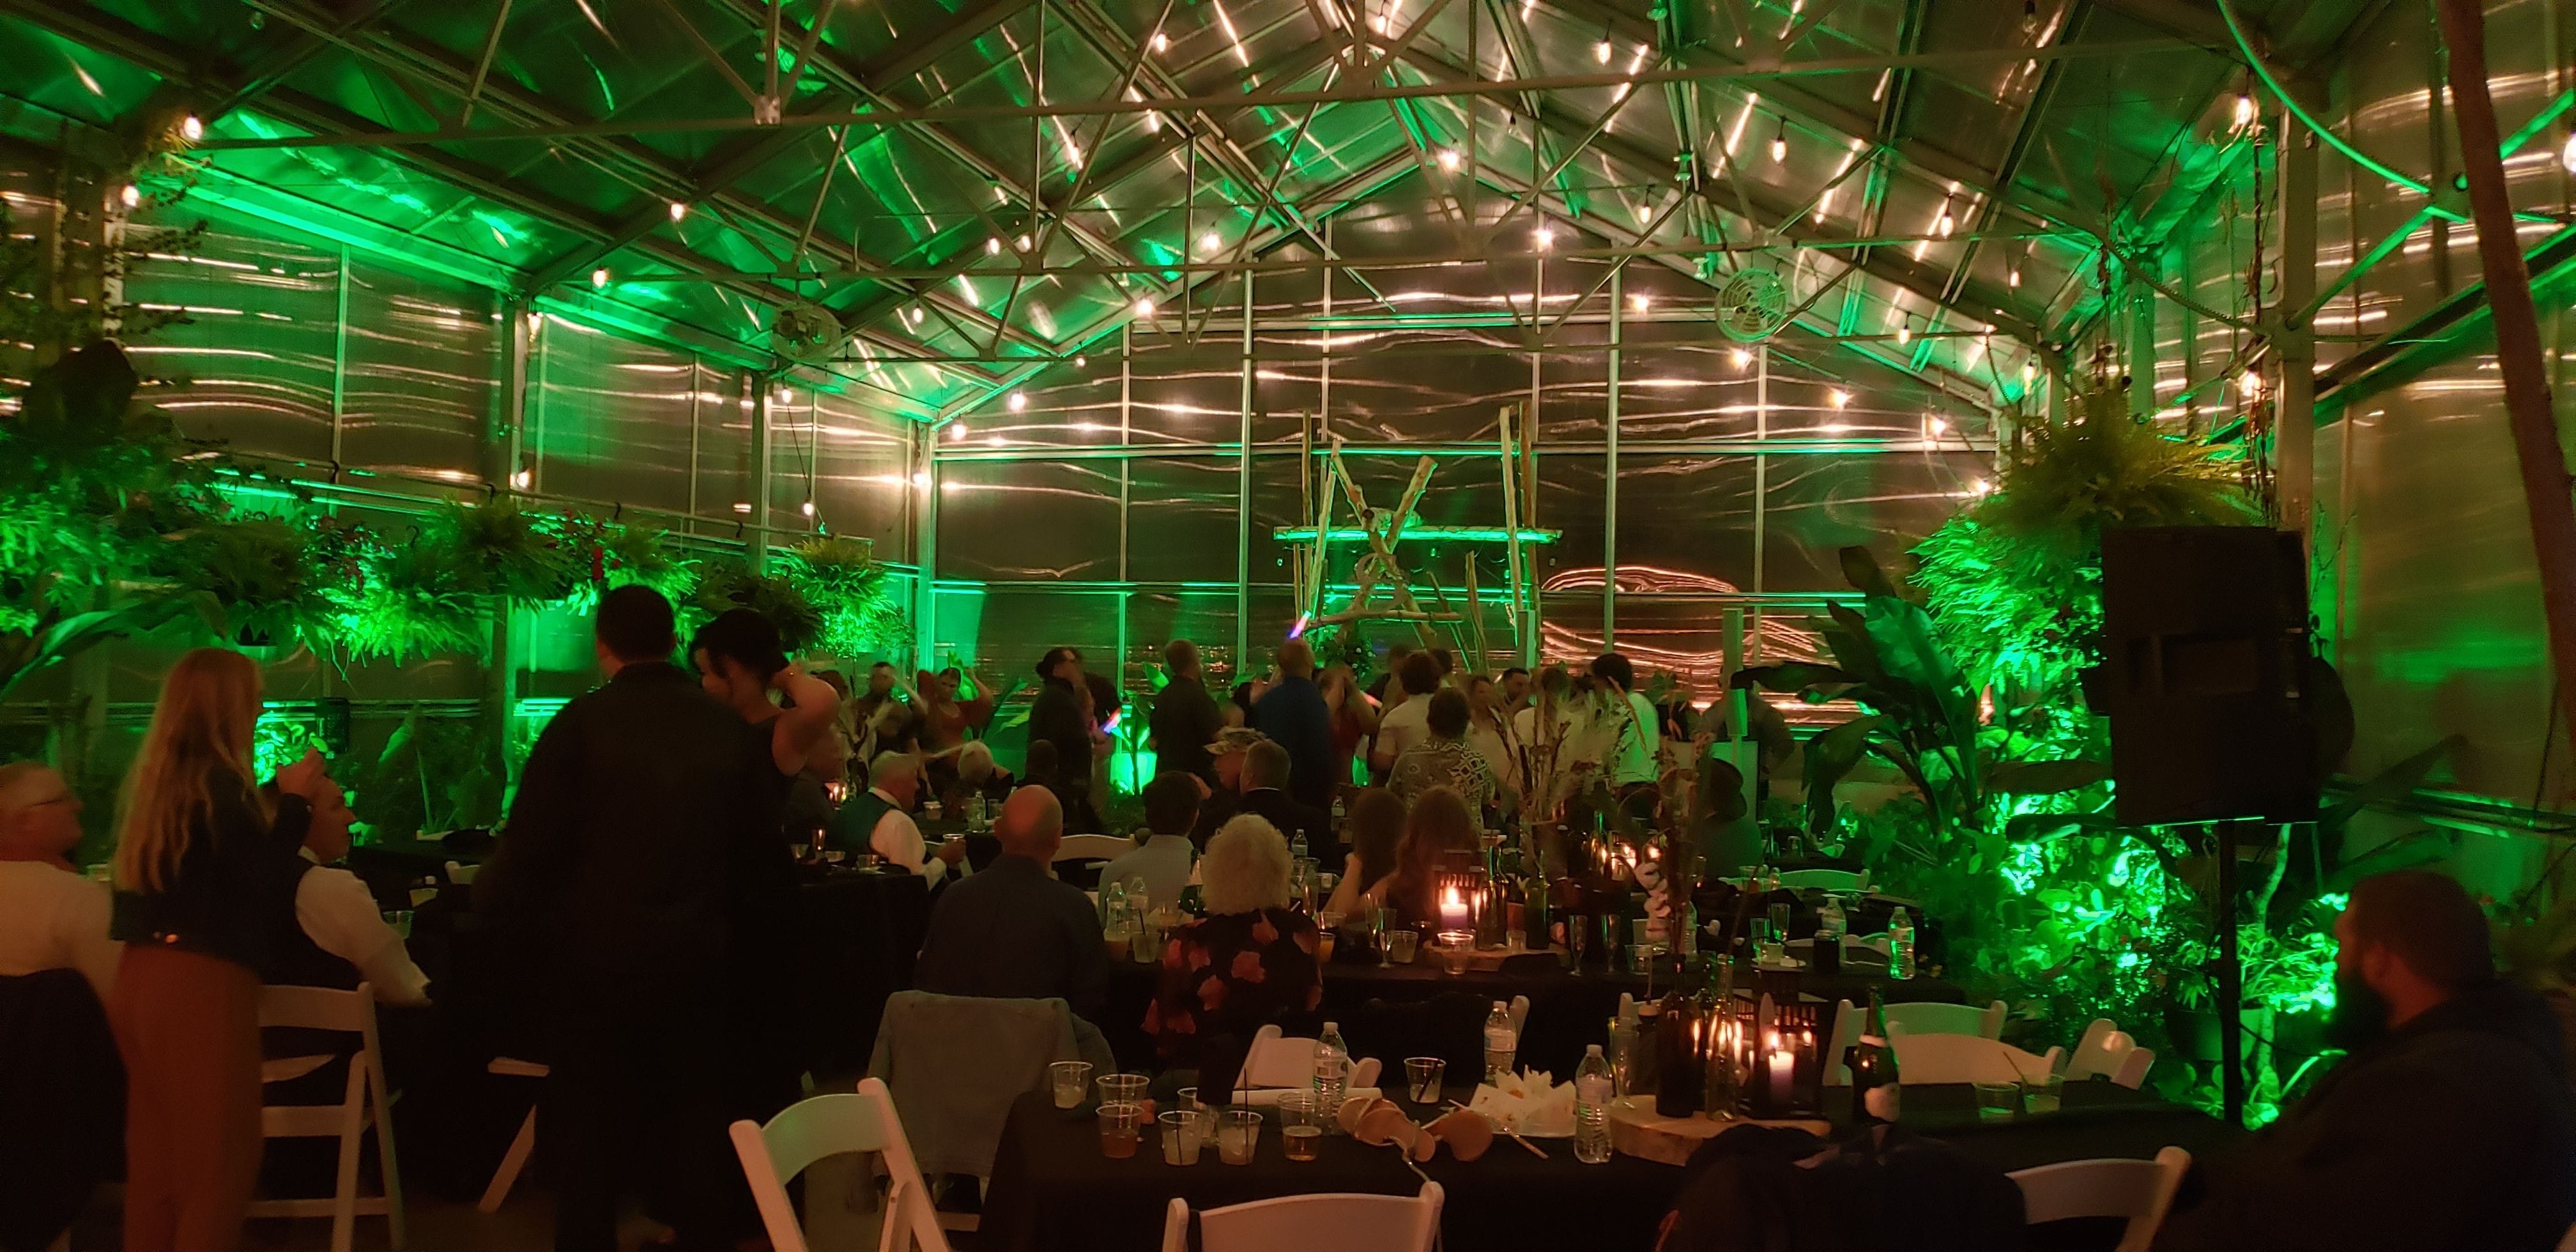 Green up lighting for a wedding reception inside the greenhouse of Sitio Events.